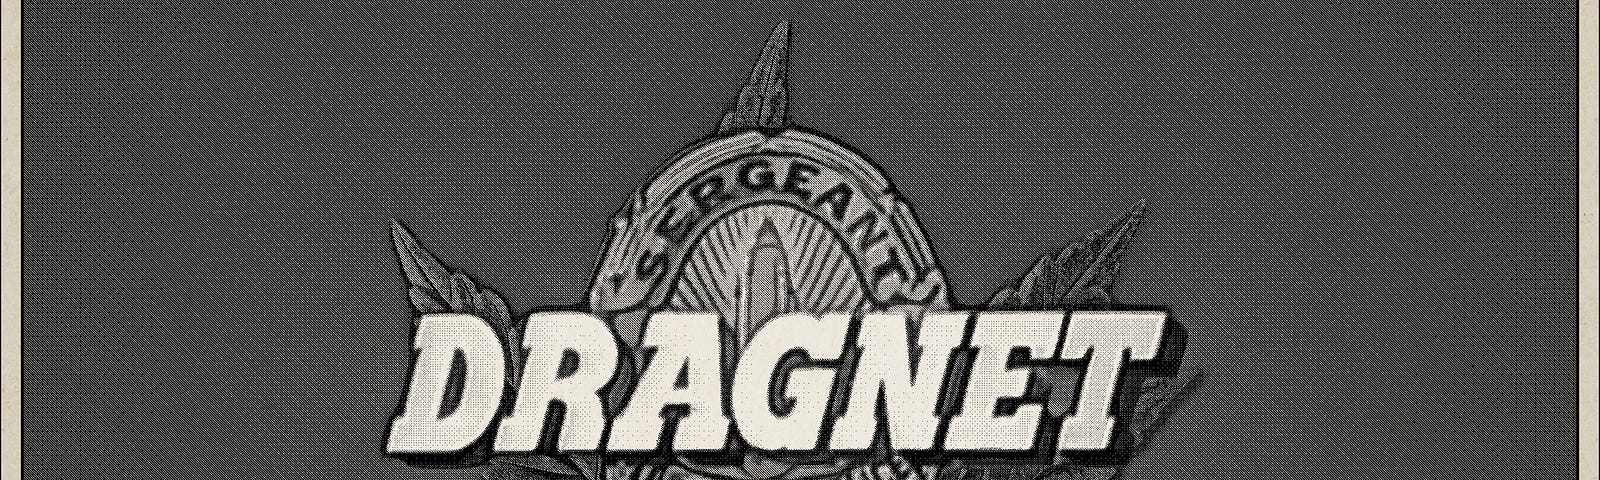 The Dragnet opening screen with a weed plant behind the badge